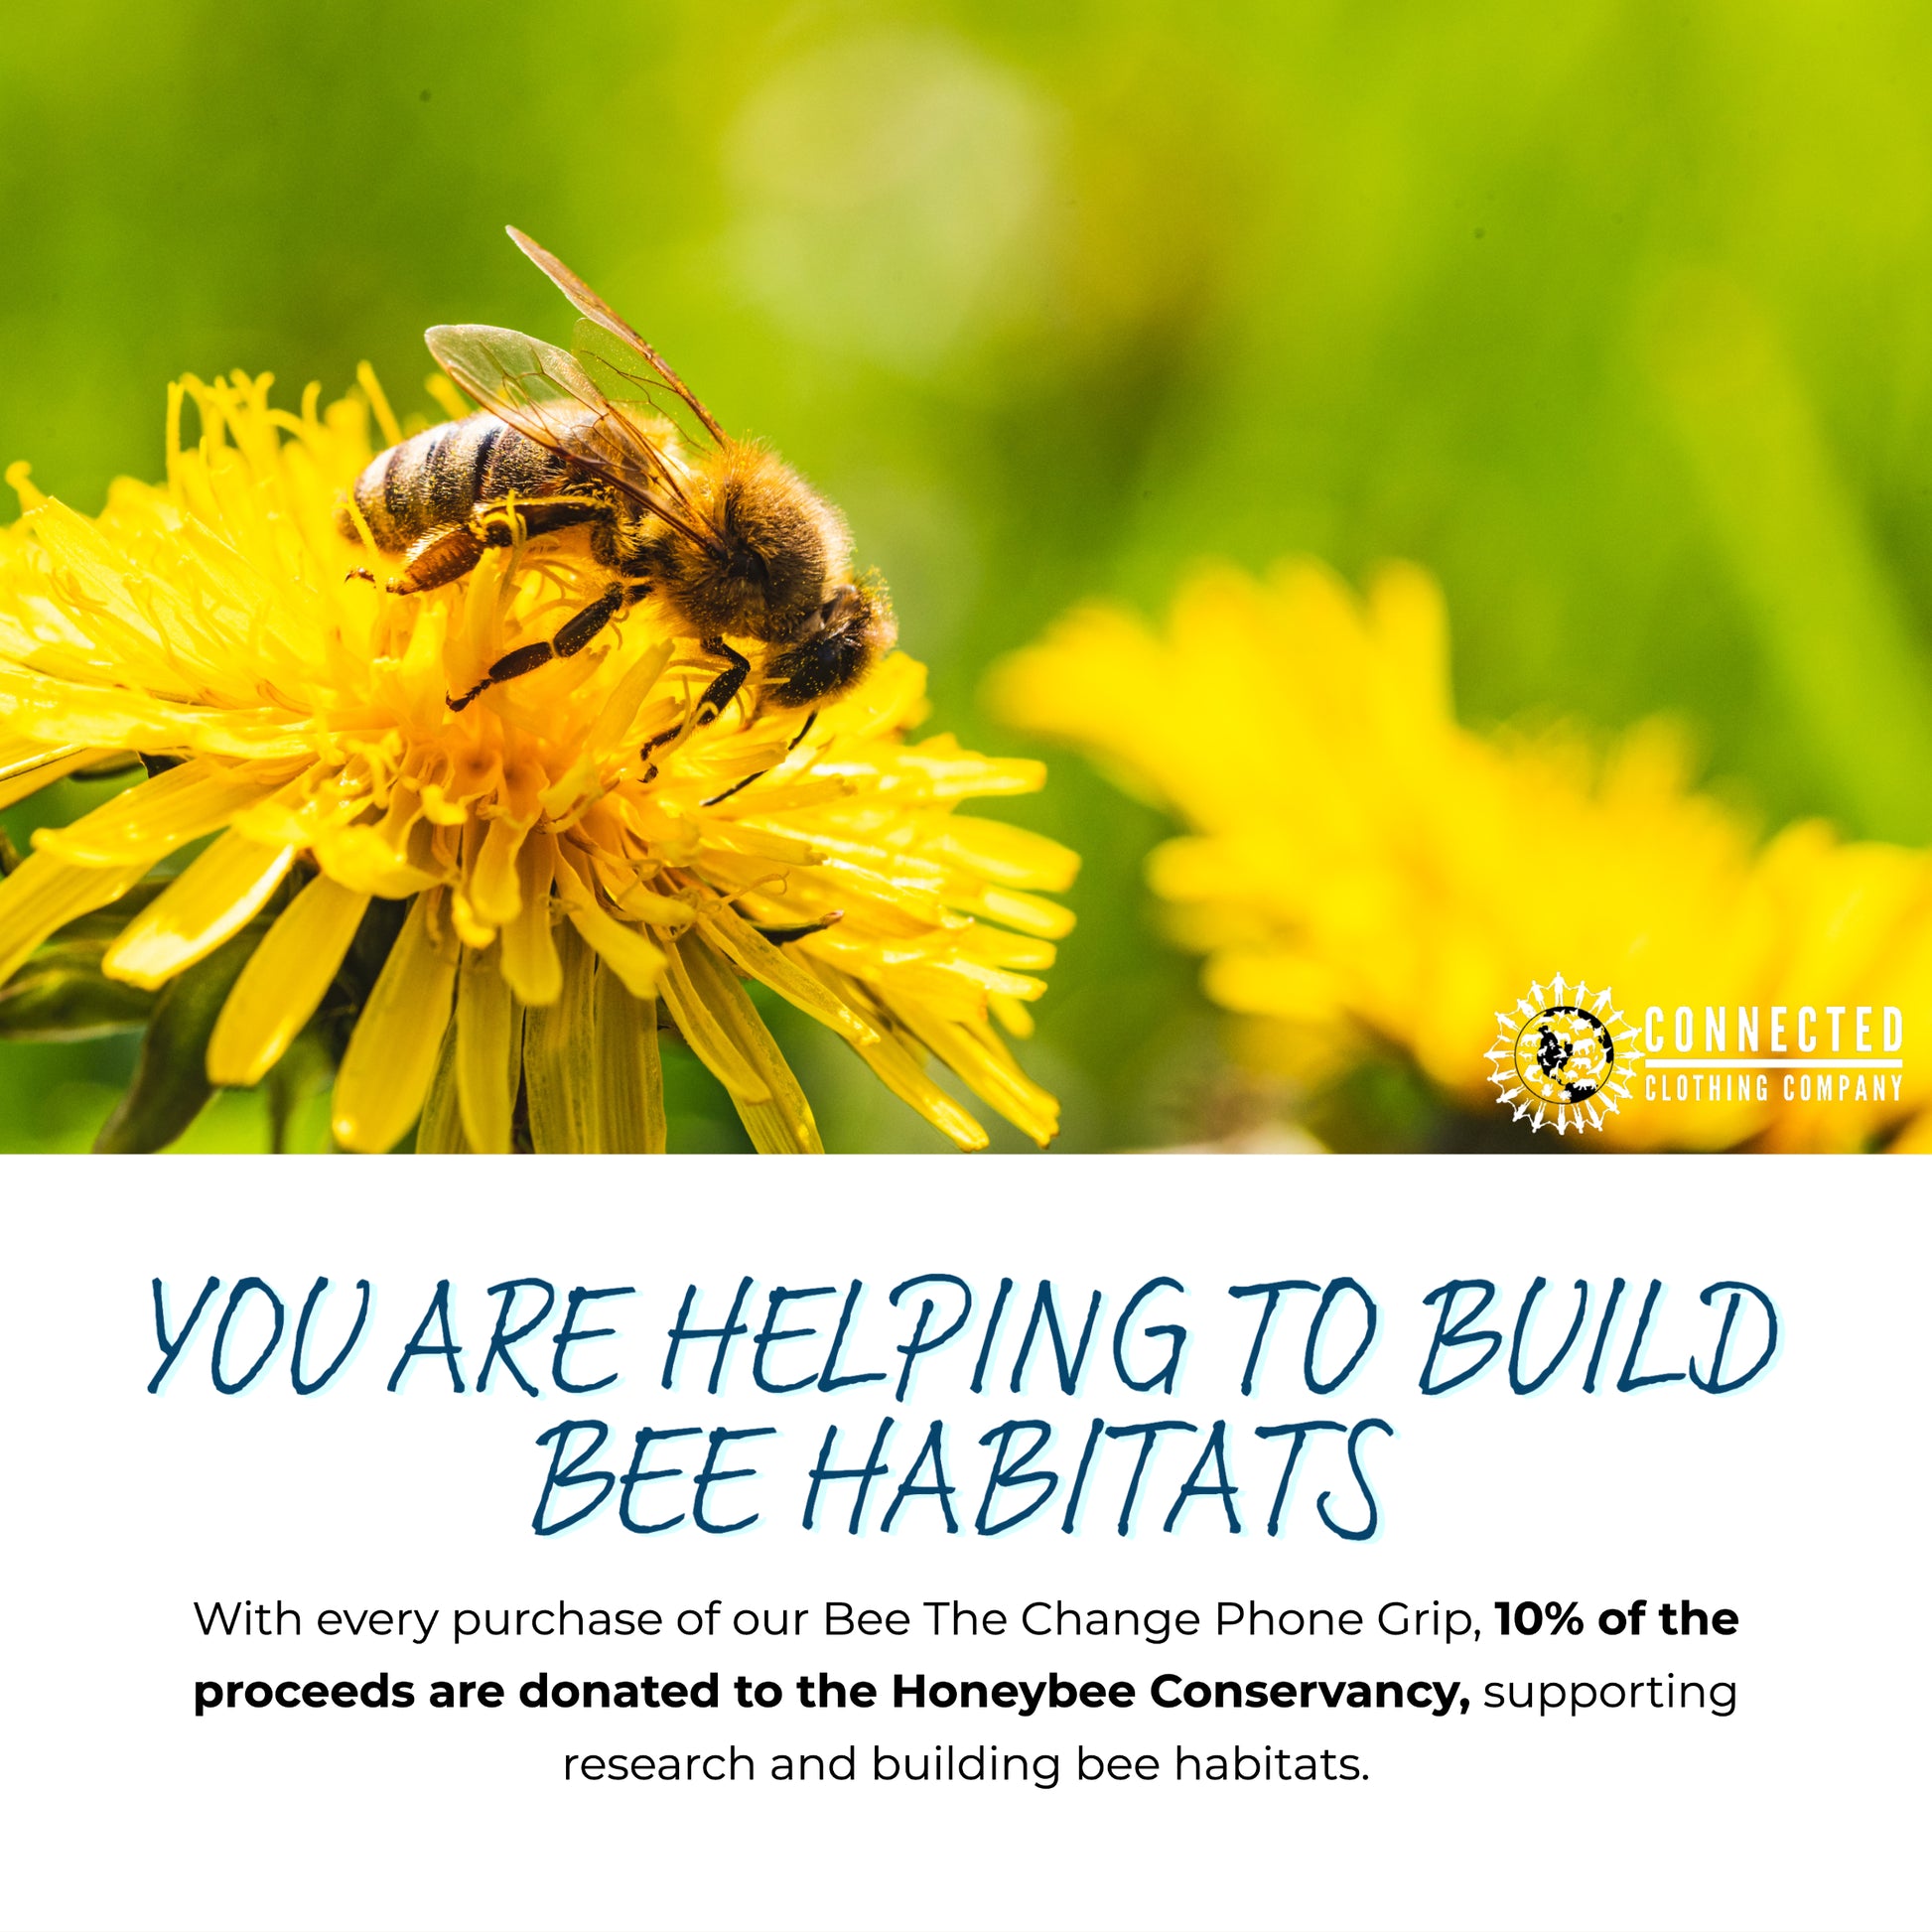 Bee The Change Phone Grip - nighttidemetalworks - 10% of proceeds donated to save the bees